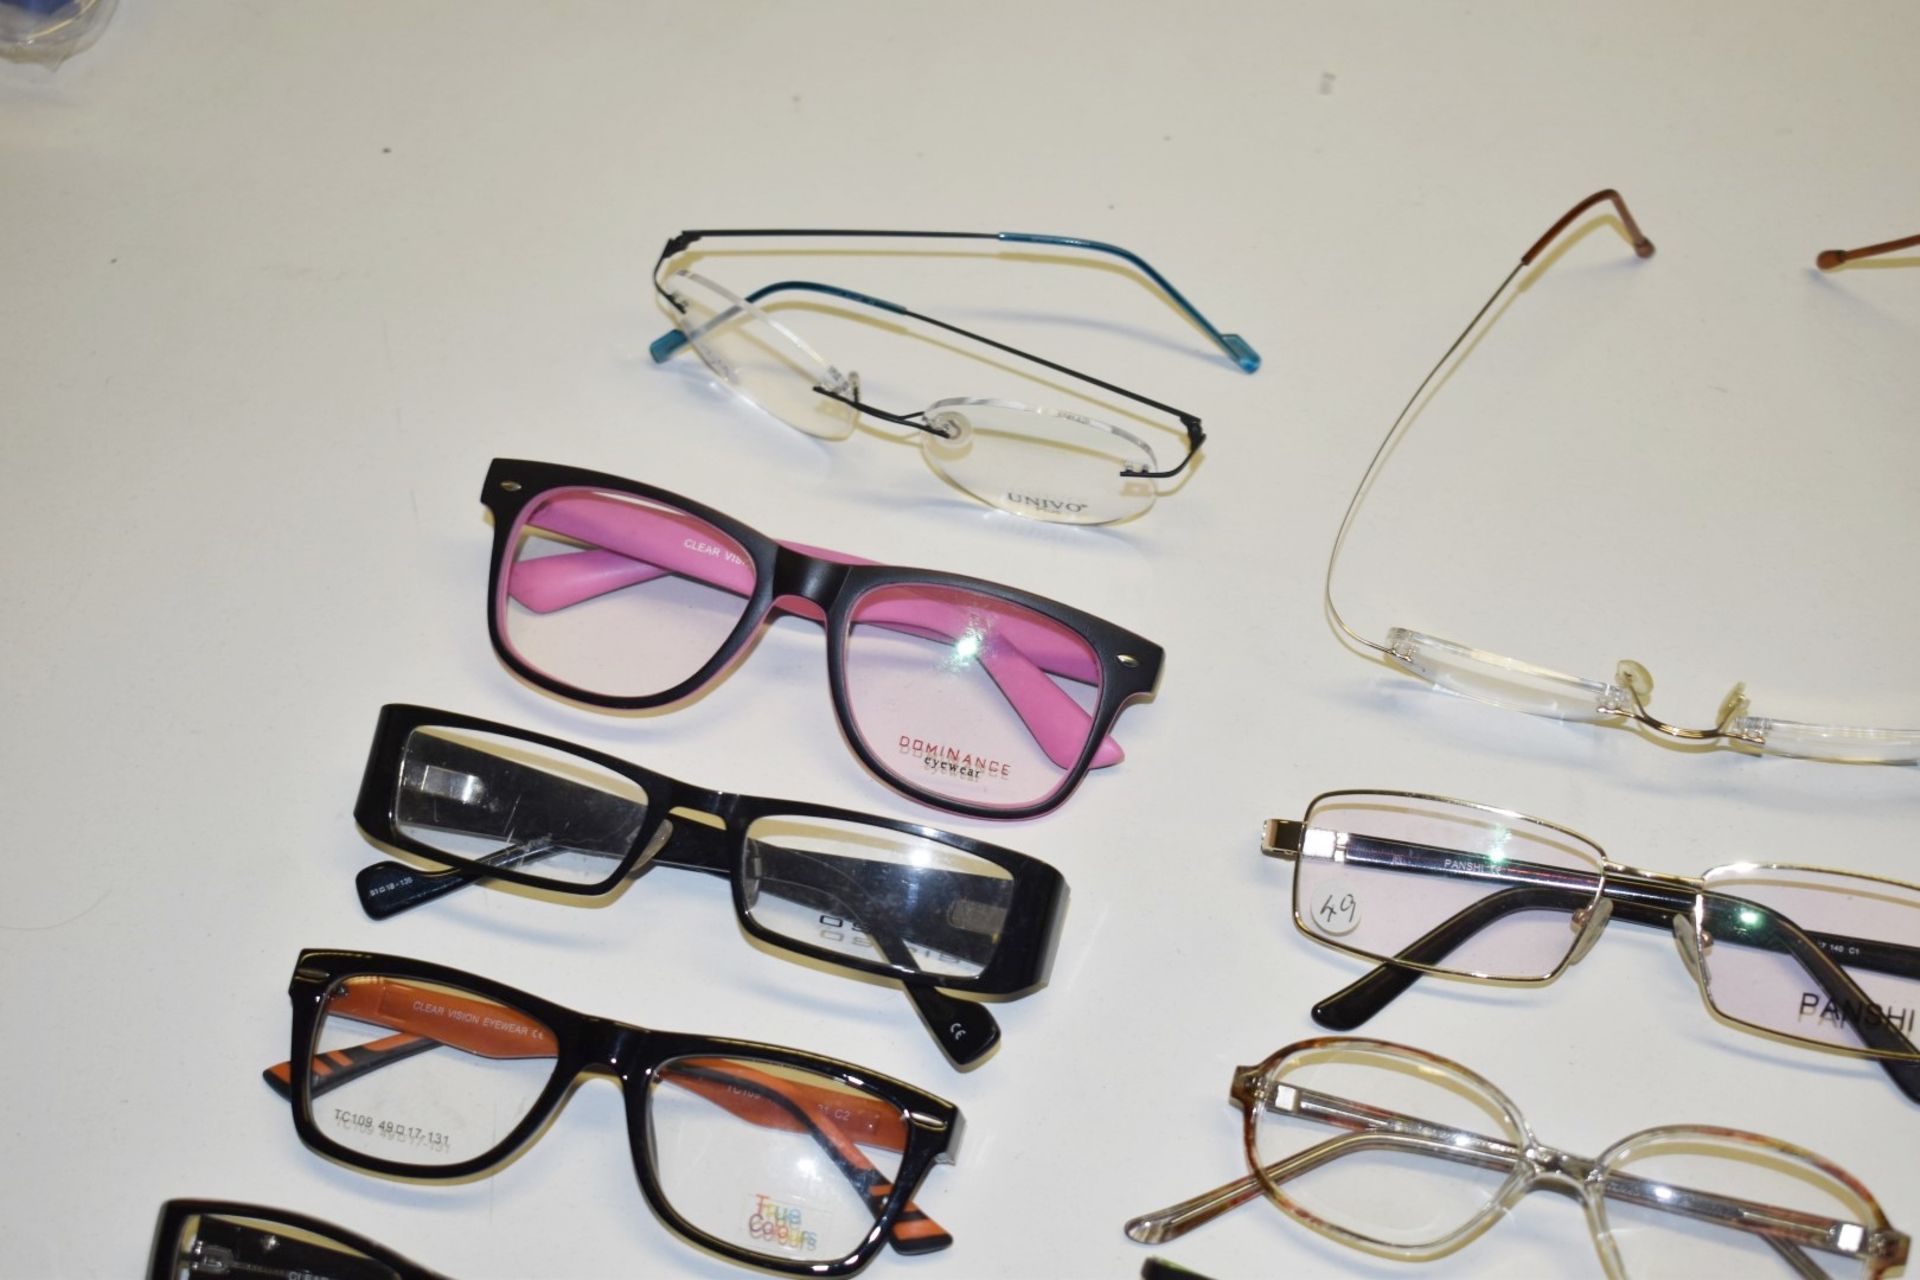 50 x Assorted Pairs of Spectacle Eye Glasses - New and Unused Stock - Various Designs and Brands - Image 2 of 19